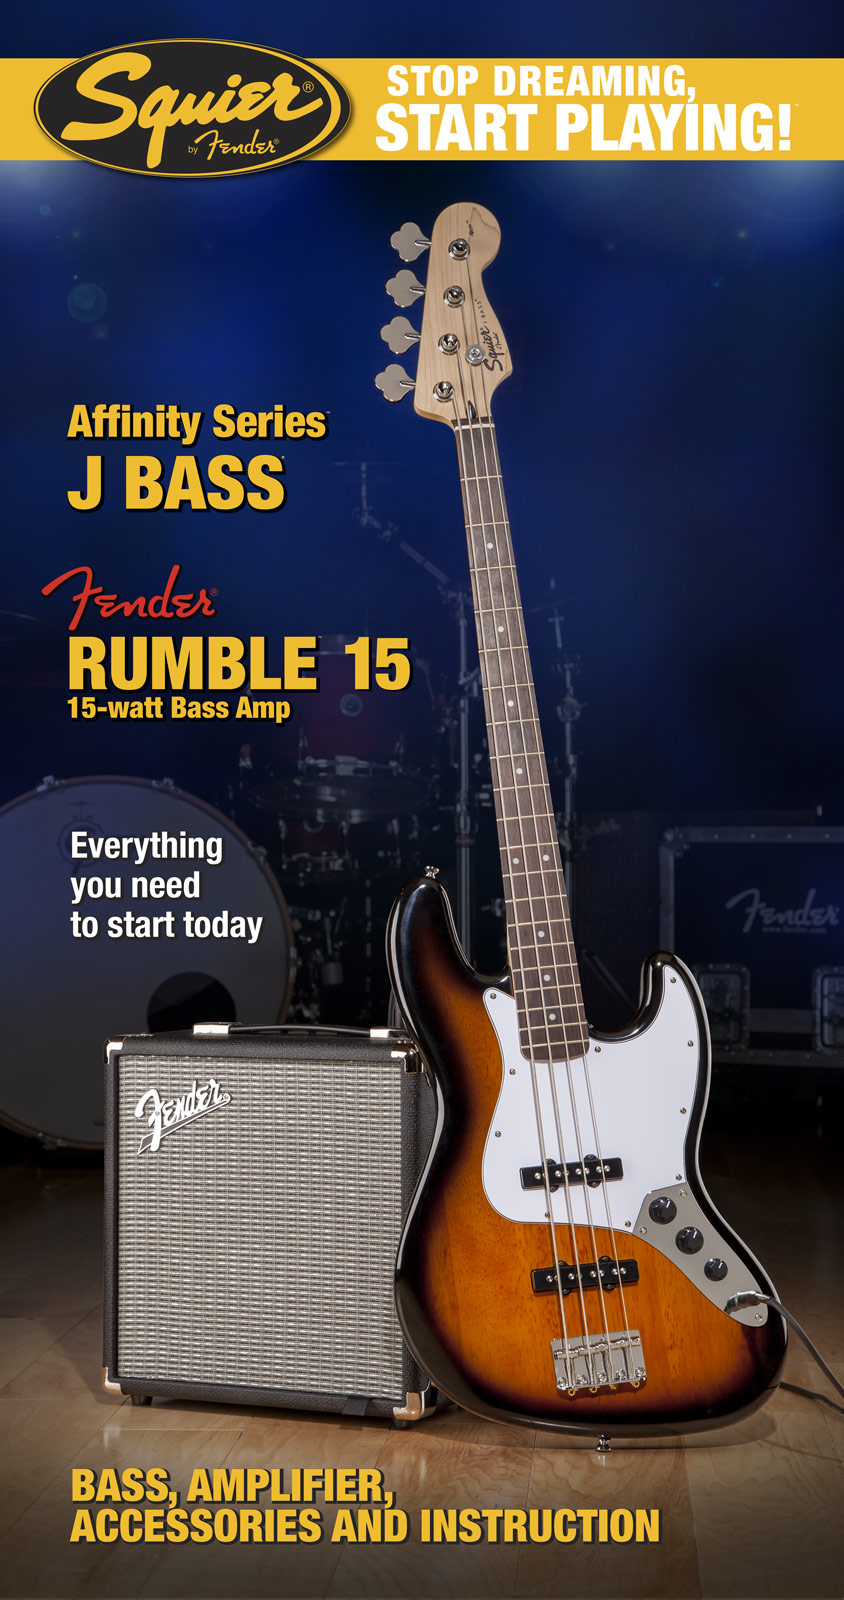 Squier Jazz Bass Affinity With Fender Rumble 15 Set - Electric bass set - Variation 1